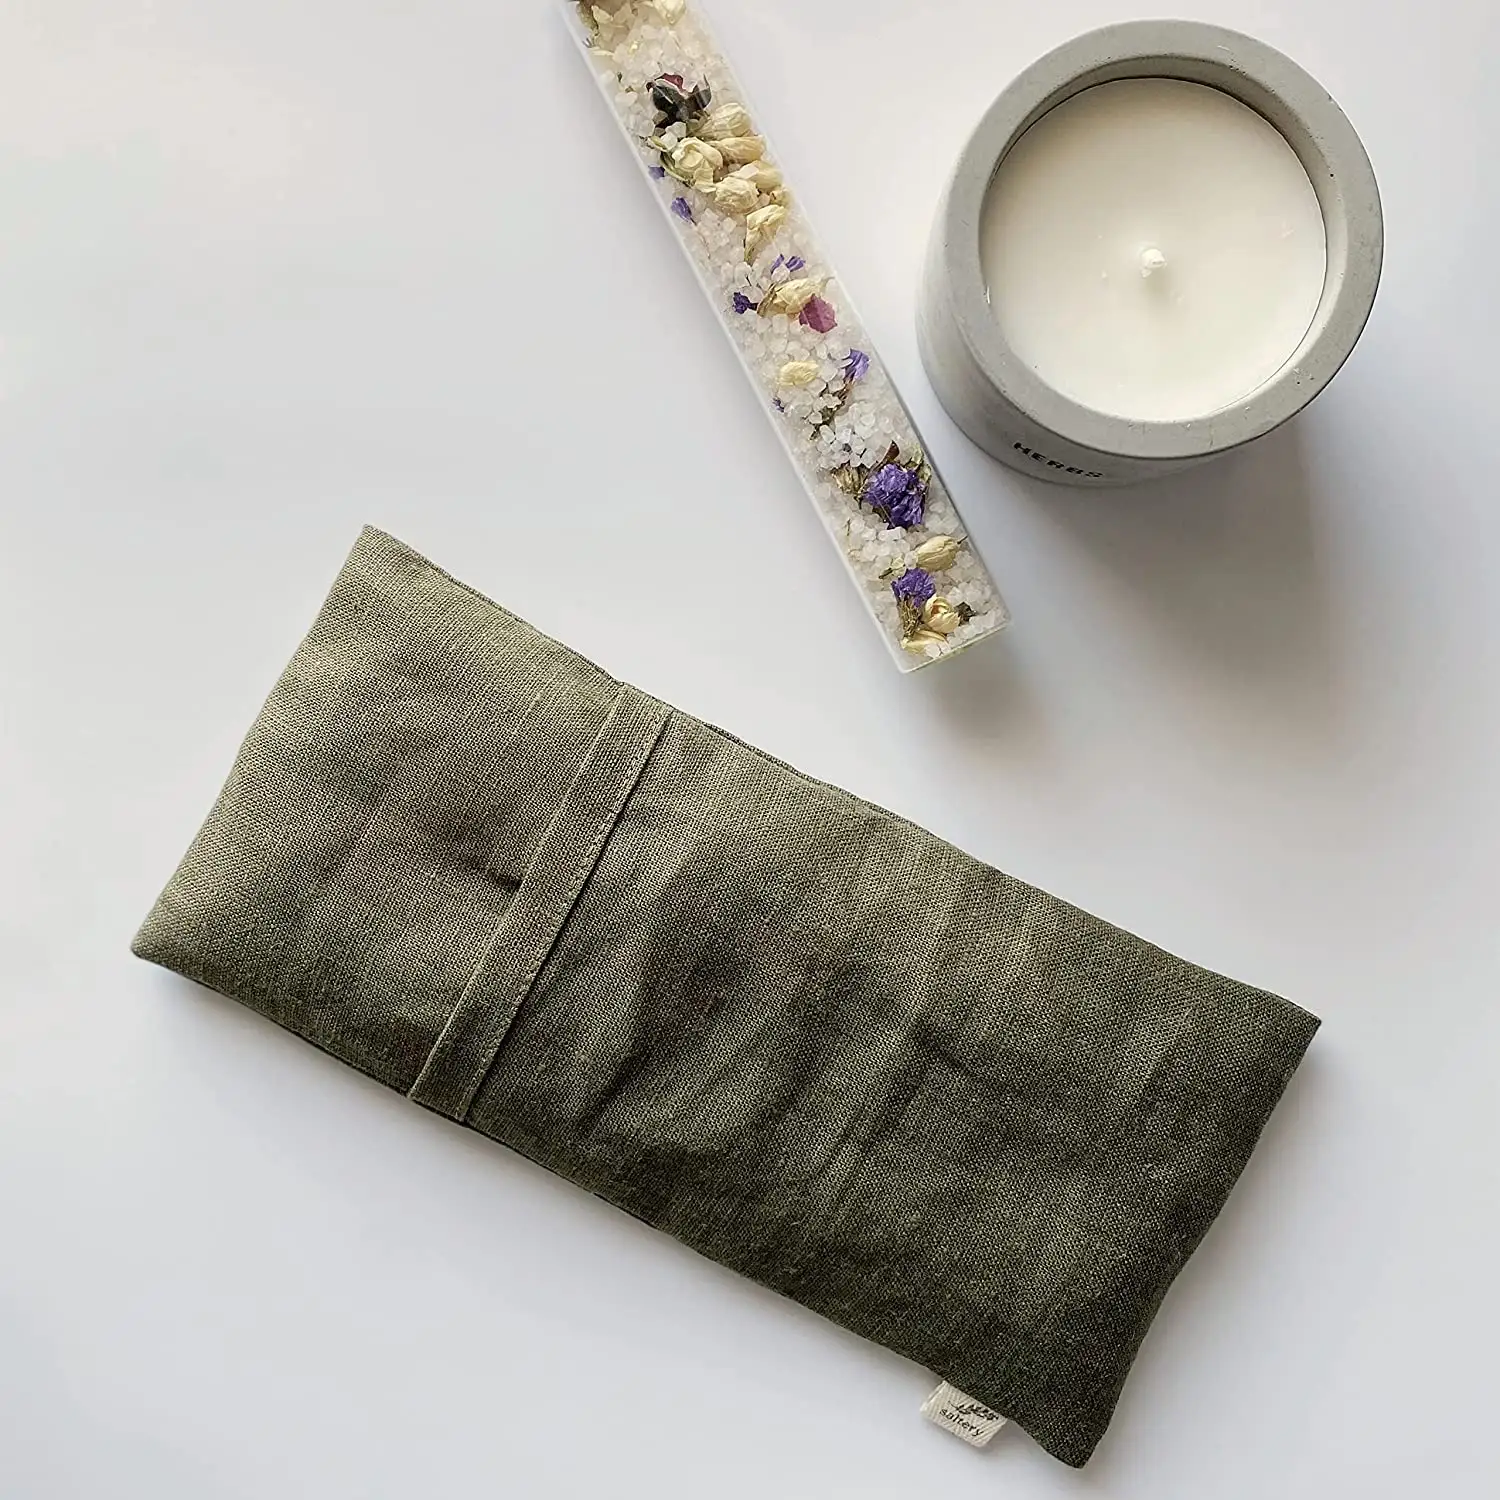 Weighted Sleeping Eye Mask Linen Yoga Scented Eye Pillow Aromatherapy Filled with Lavender and Flaxseed Moist Heat Eye Compress